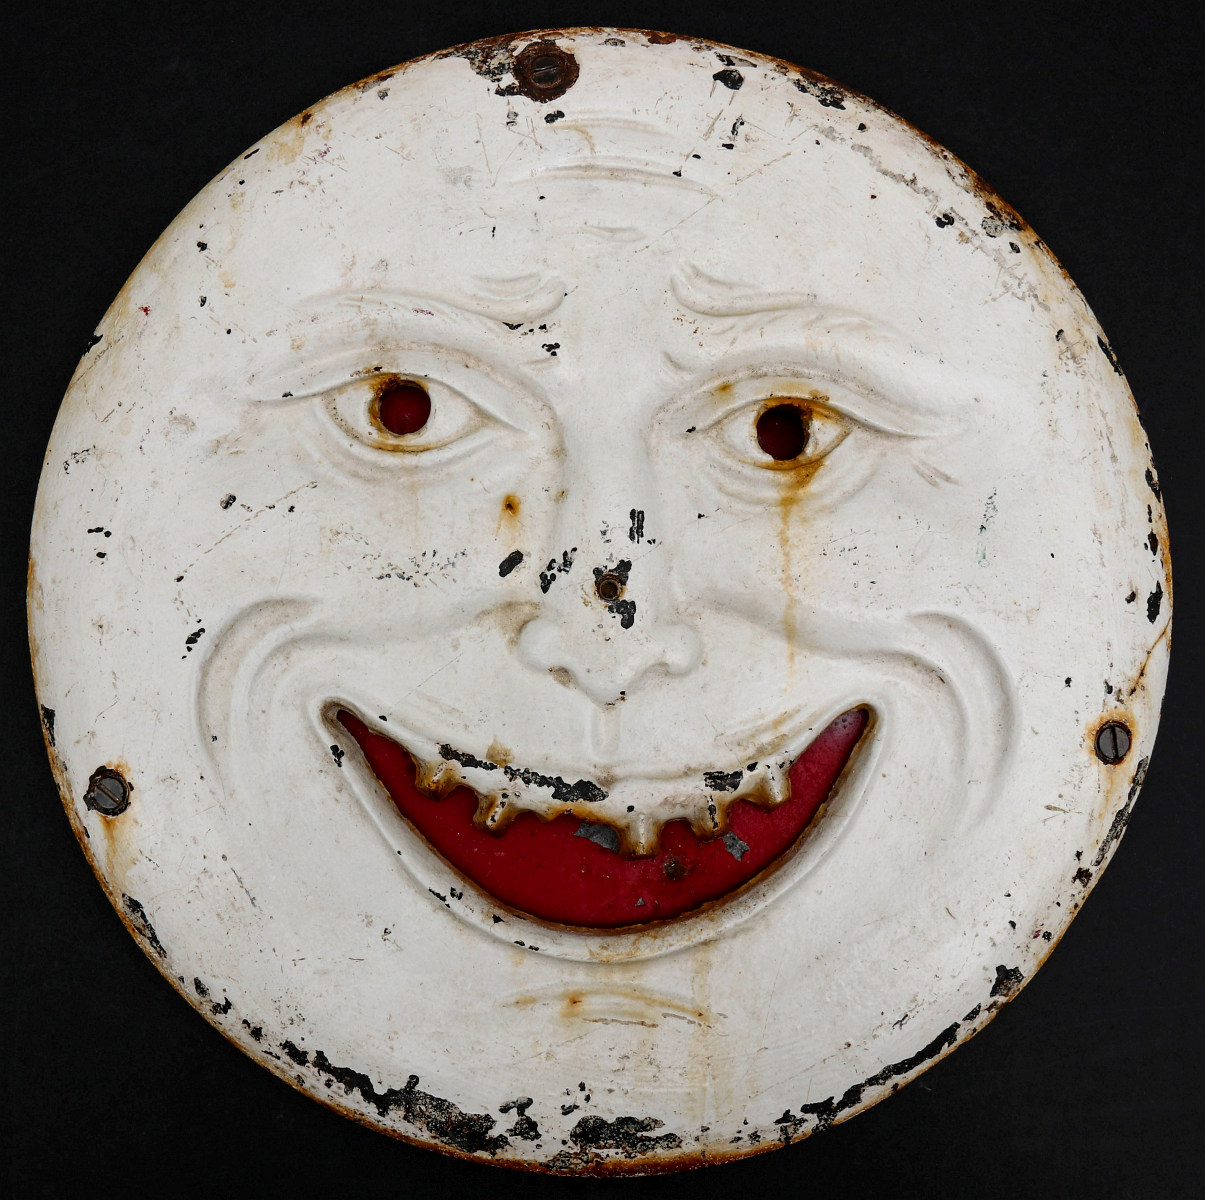 A SMILING MAN IN THE MOON IRON SHOOTING GALLERY TARGET